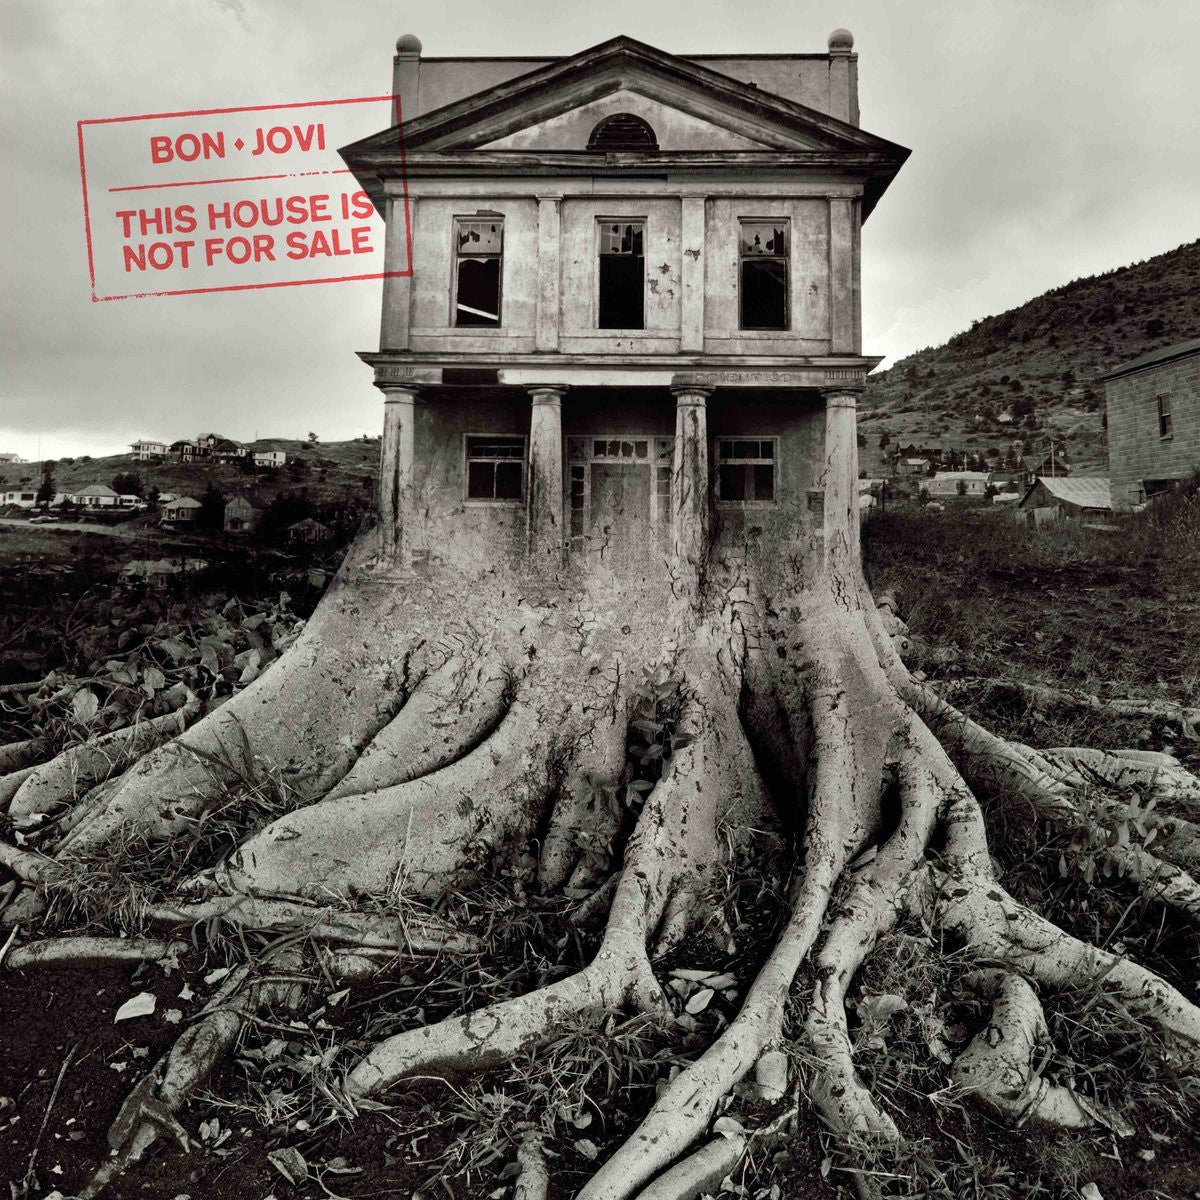 Bon Jovi - This House Is Not For Sale - New Vinyl Record 2016 Island Records New Studio LP w/ Gatefold Cover - Pop / Rock